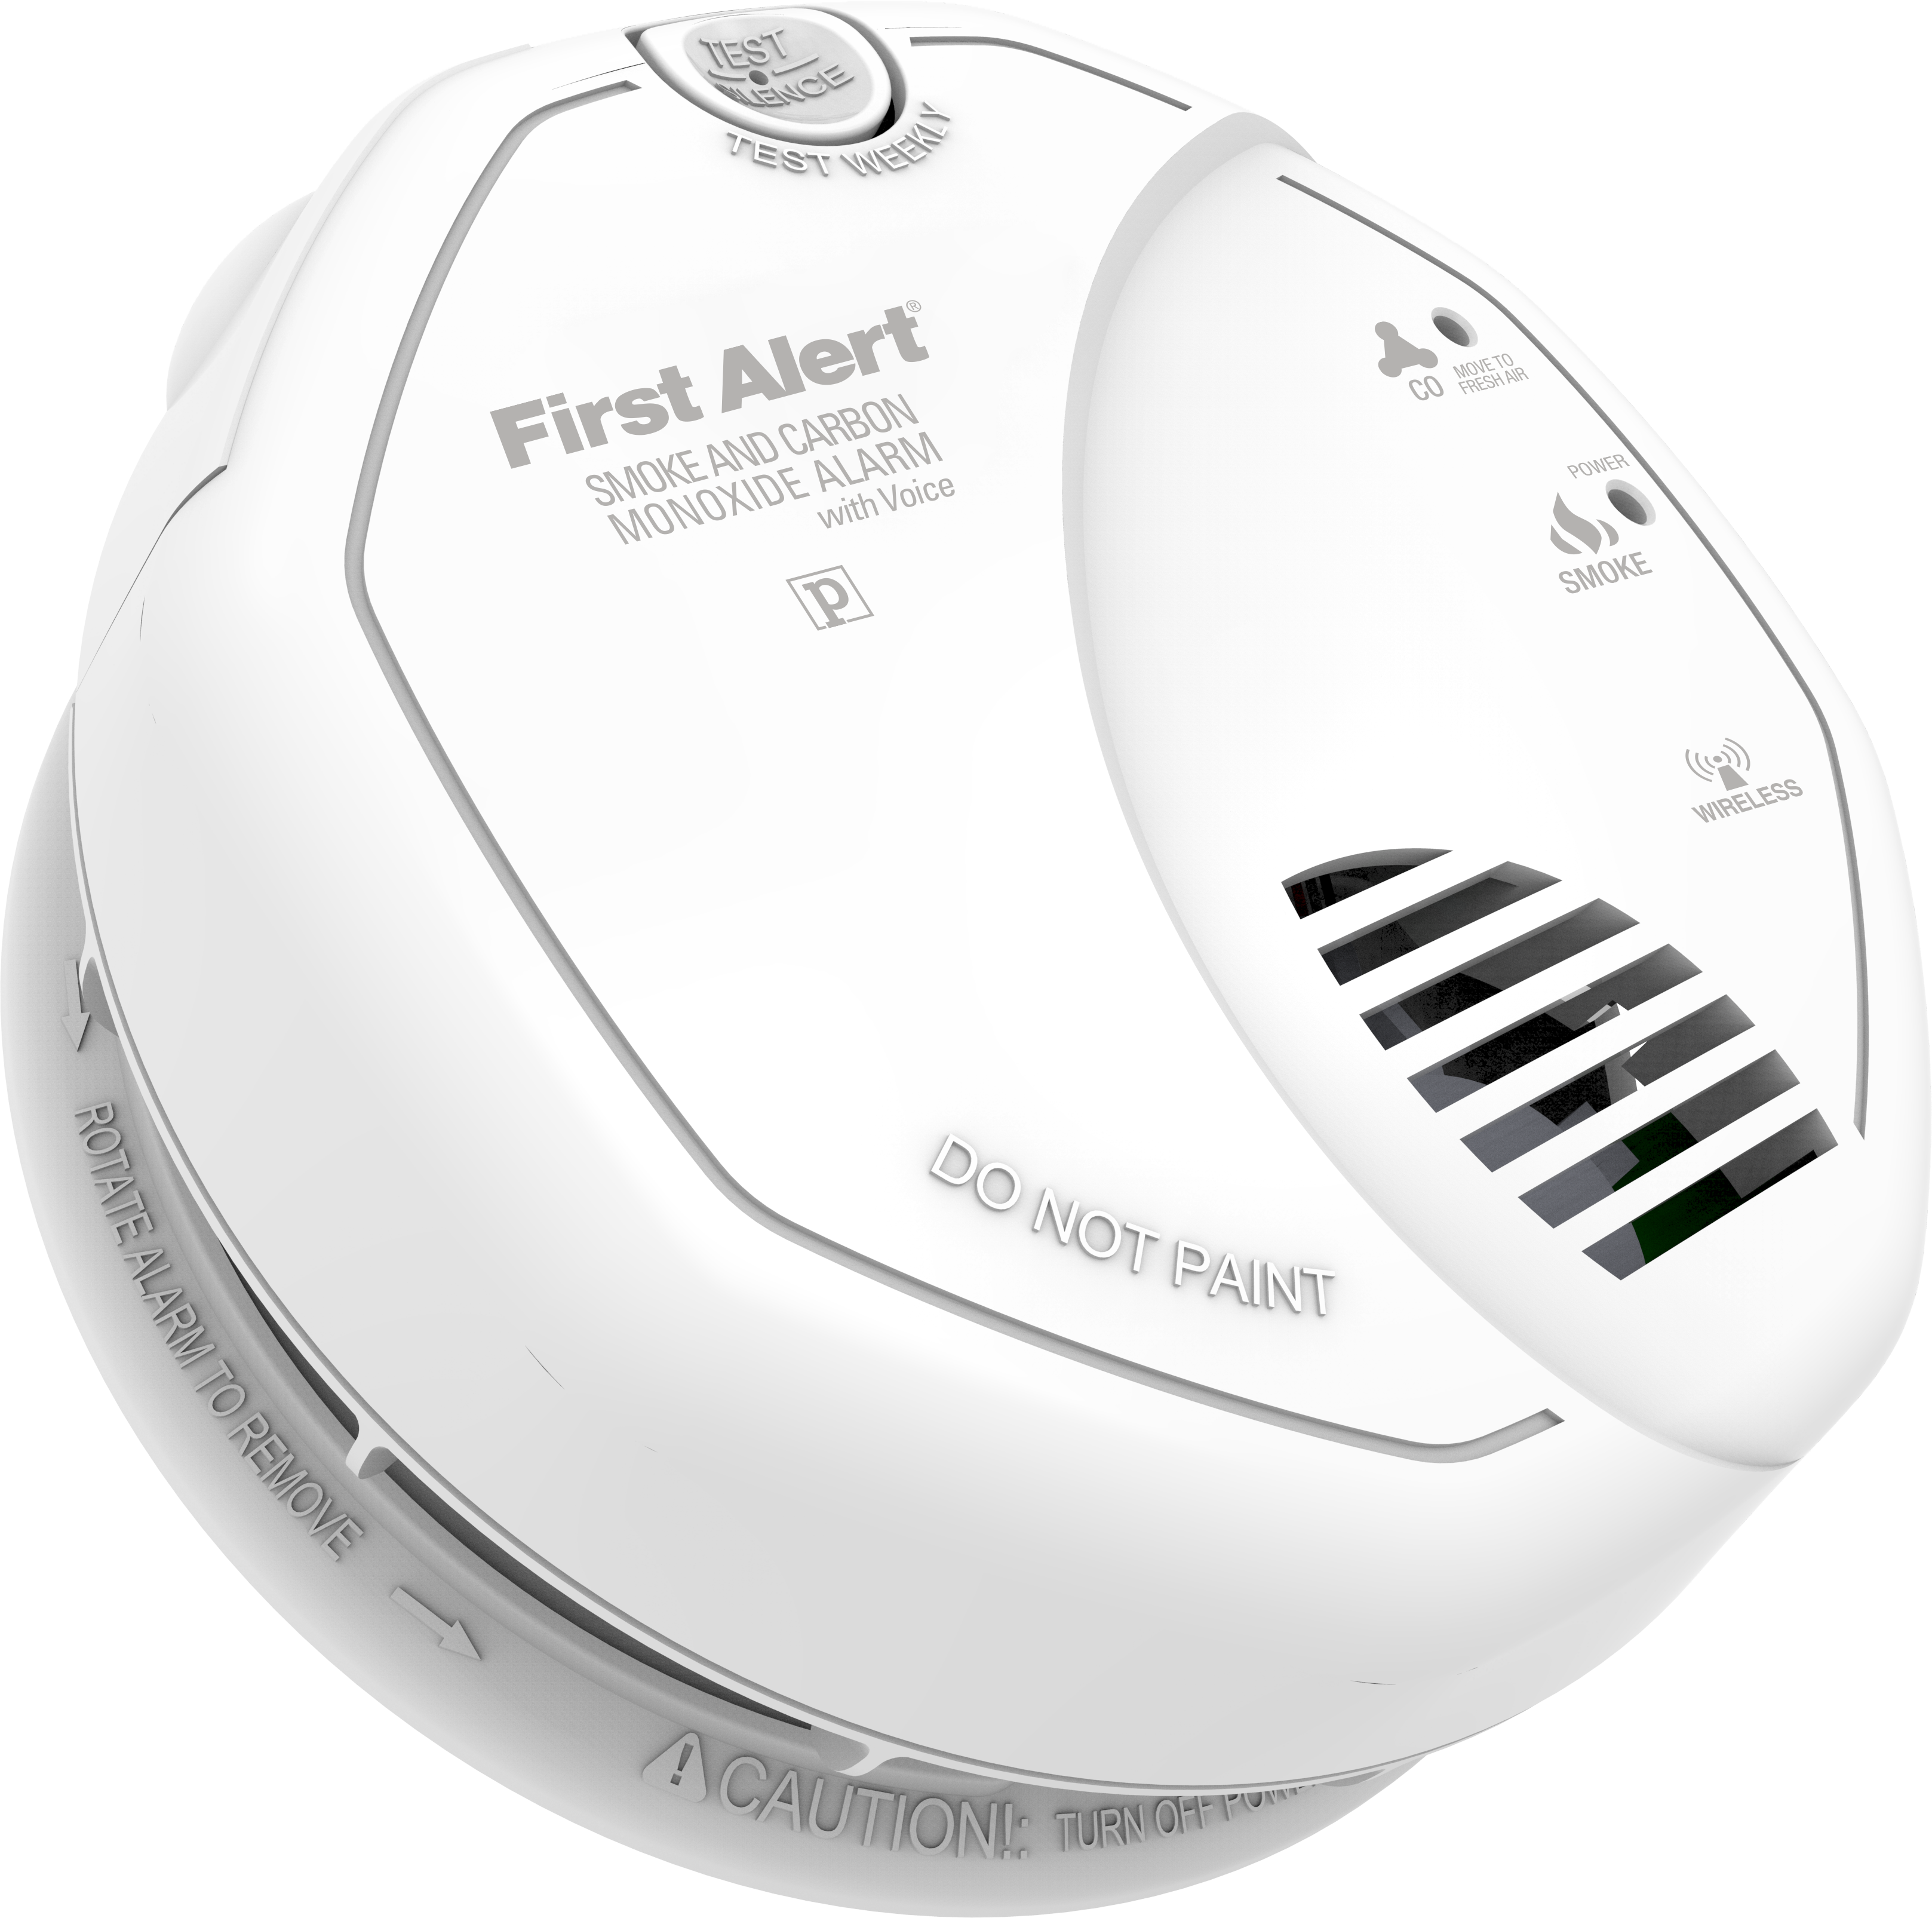 BRK Wireless Interconnect Alarms provide a cost effective solution when it comes to renovation and retrofit projects where interconnectability is a requirement. Easily interconnect between floors and new to existing construction wirelessly. Smoke/CO combo version.